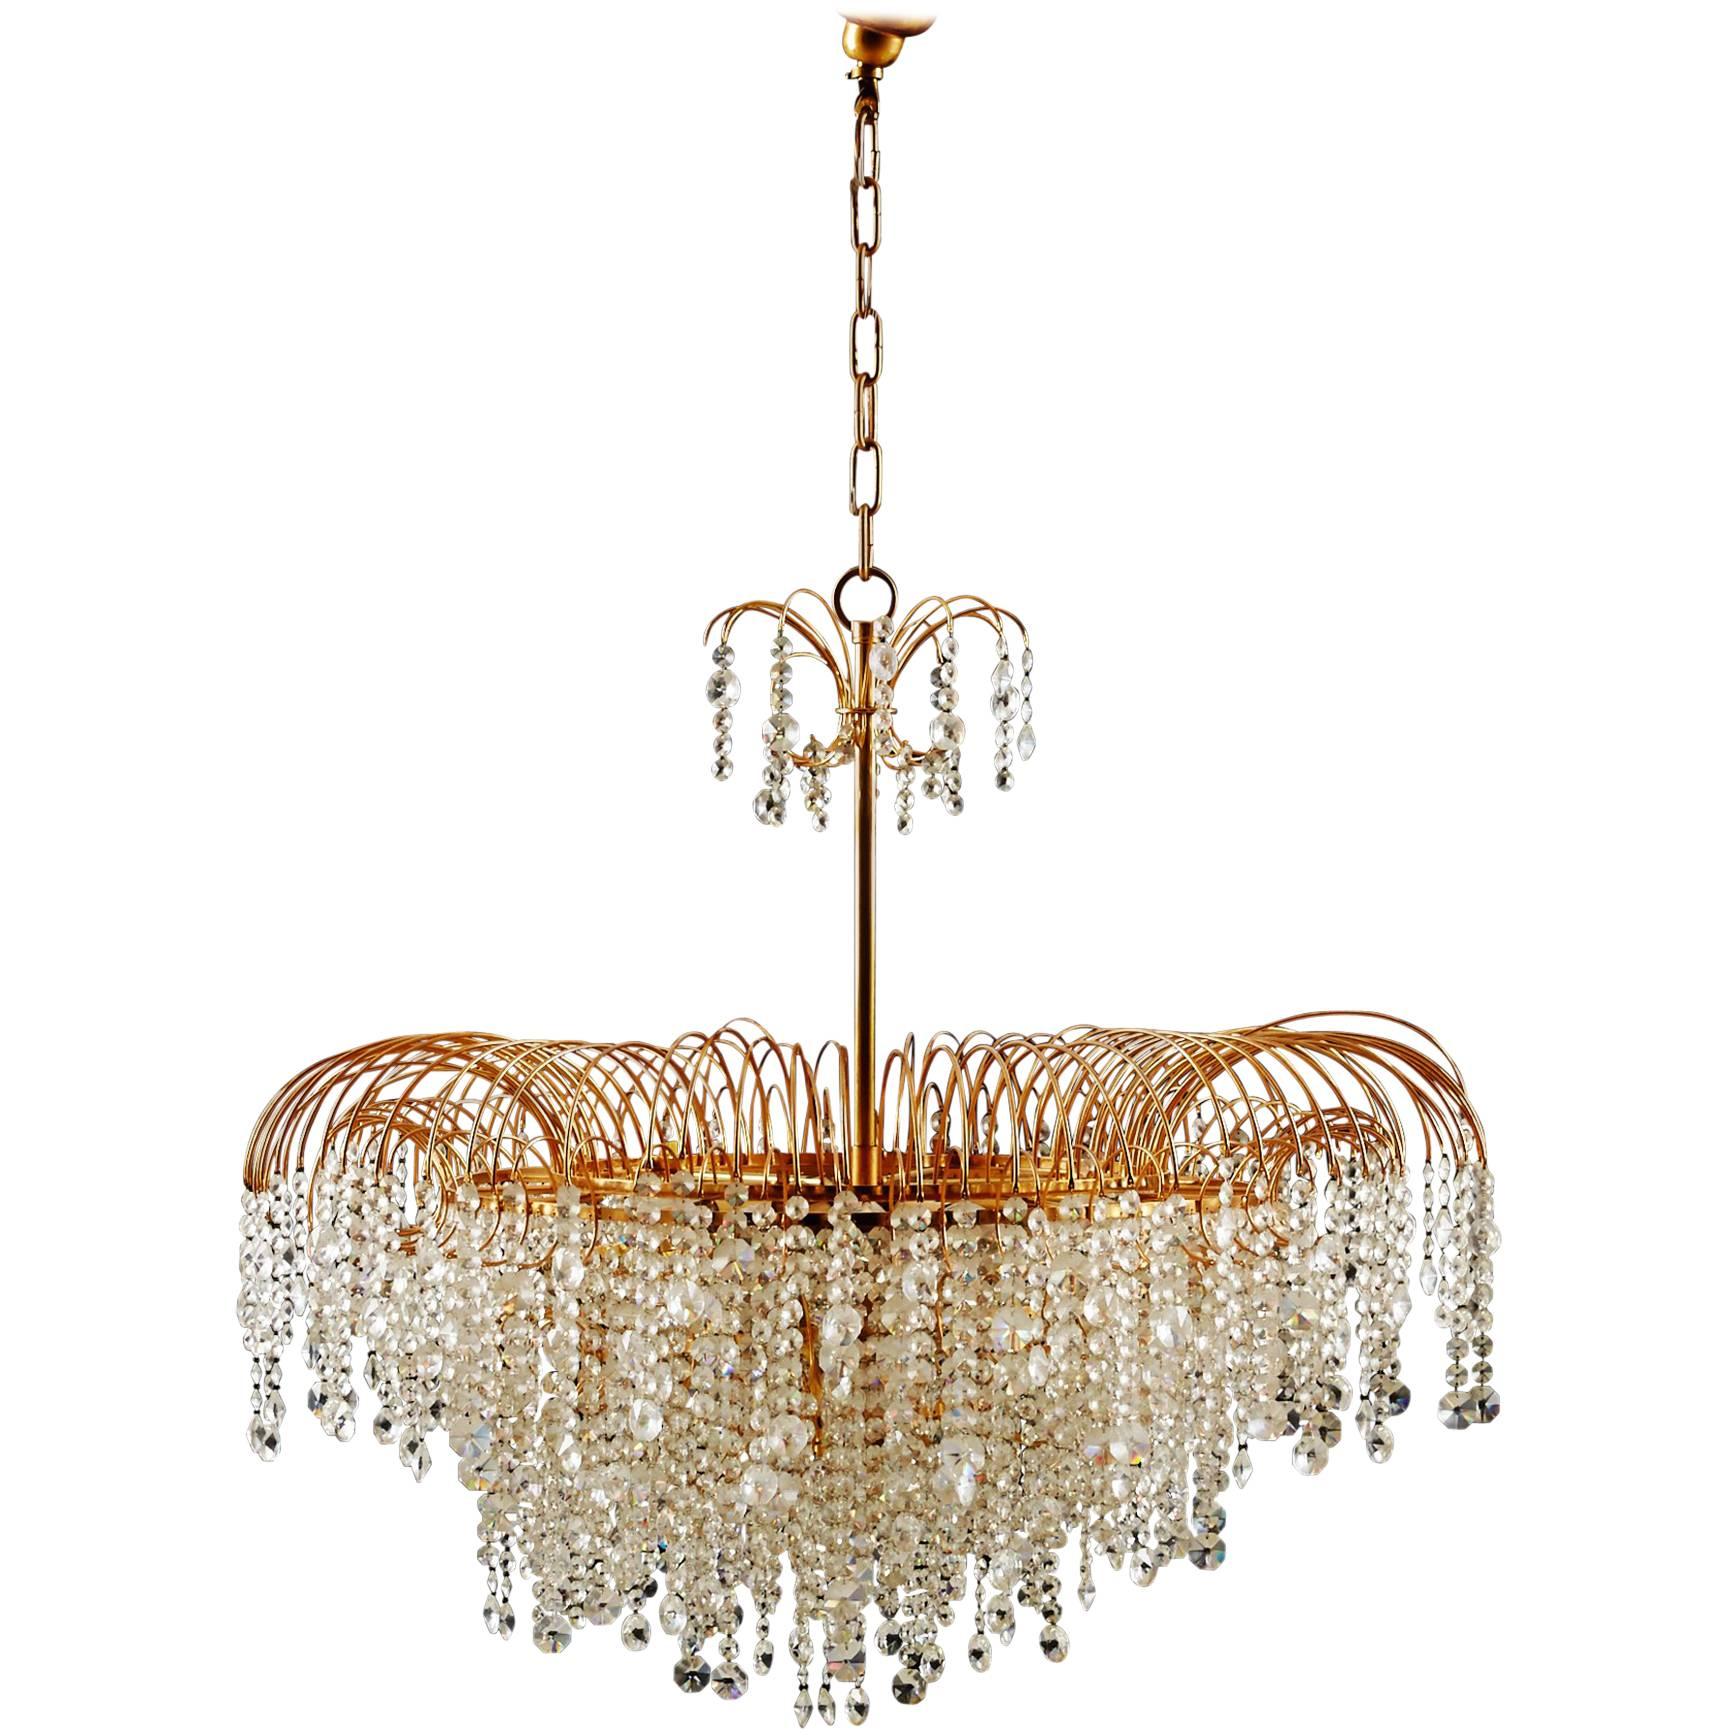 Stunning Cut Crystal Chandelier from the 1970s